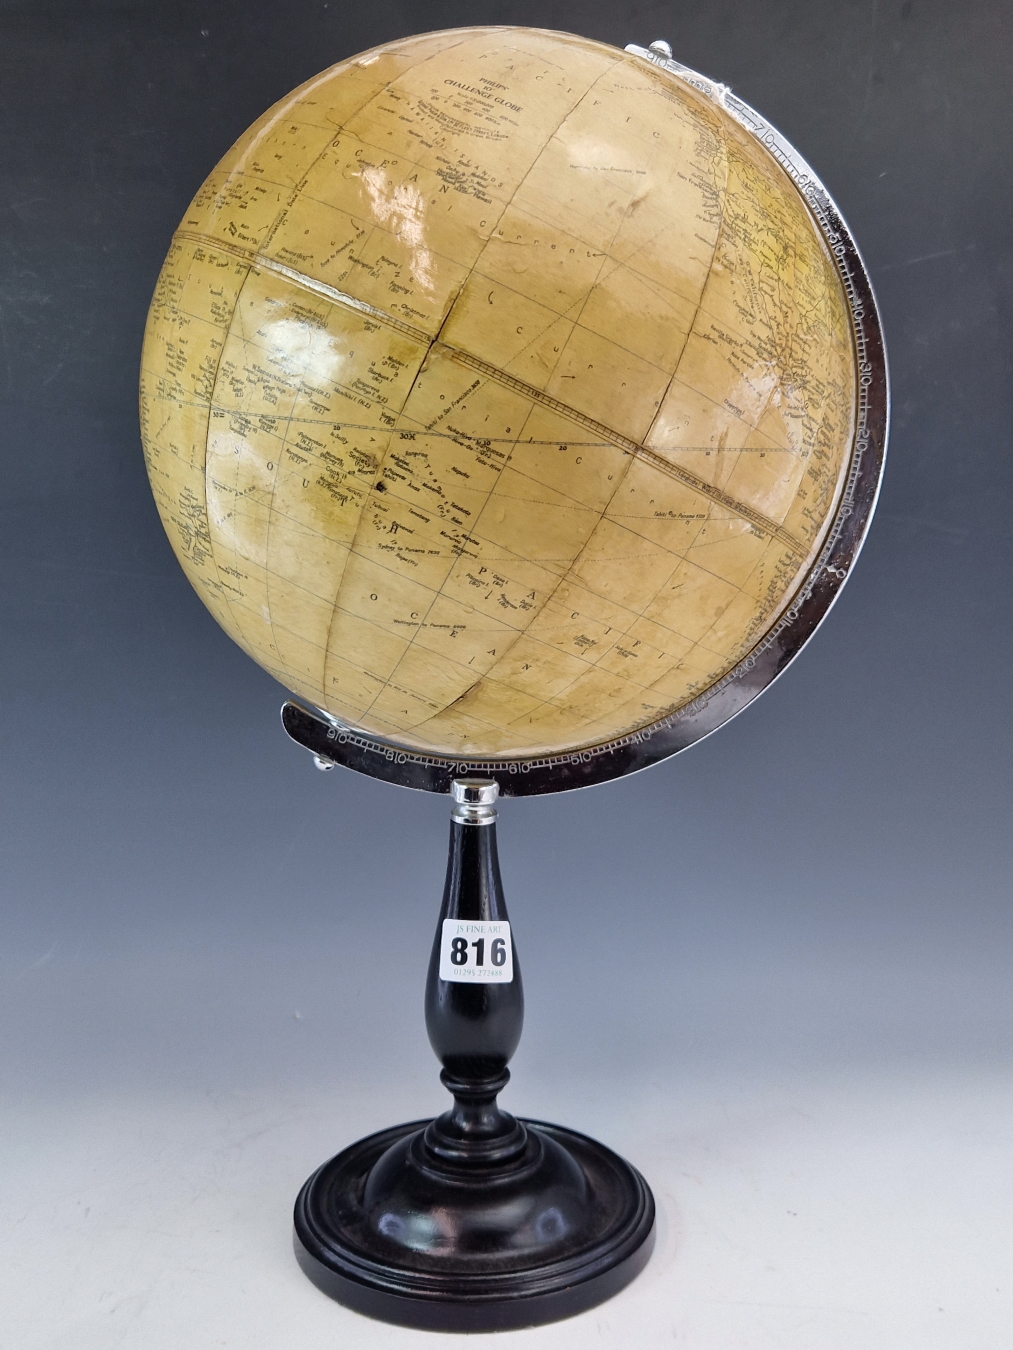 A 1961 PHILIPS CHALLENGE TERRESTRIAL GLOBE ON AN EBONISED STAND WITH A CIRCULAR FOOT.